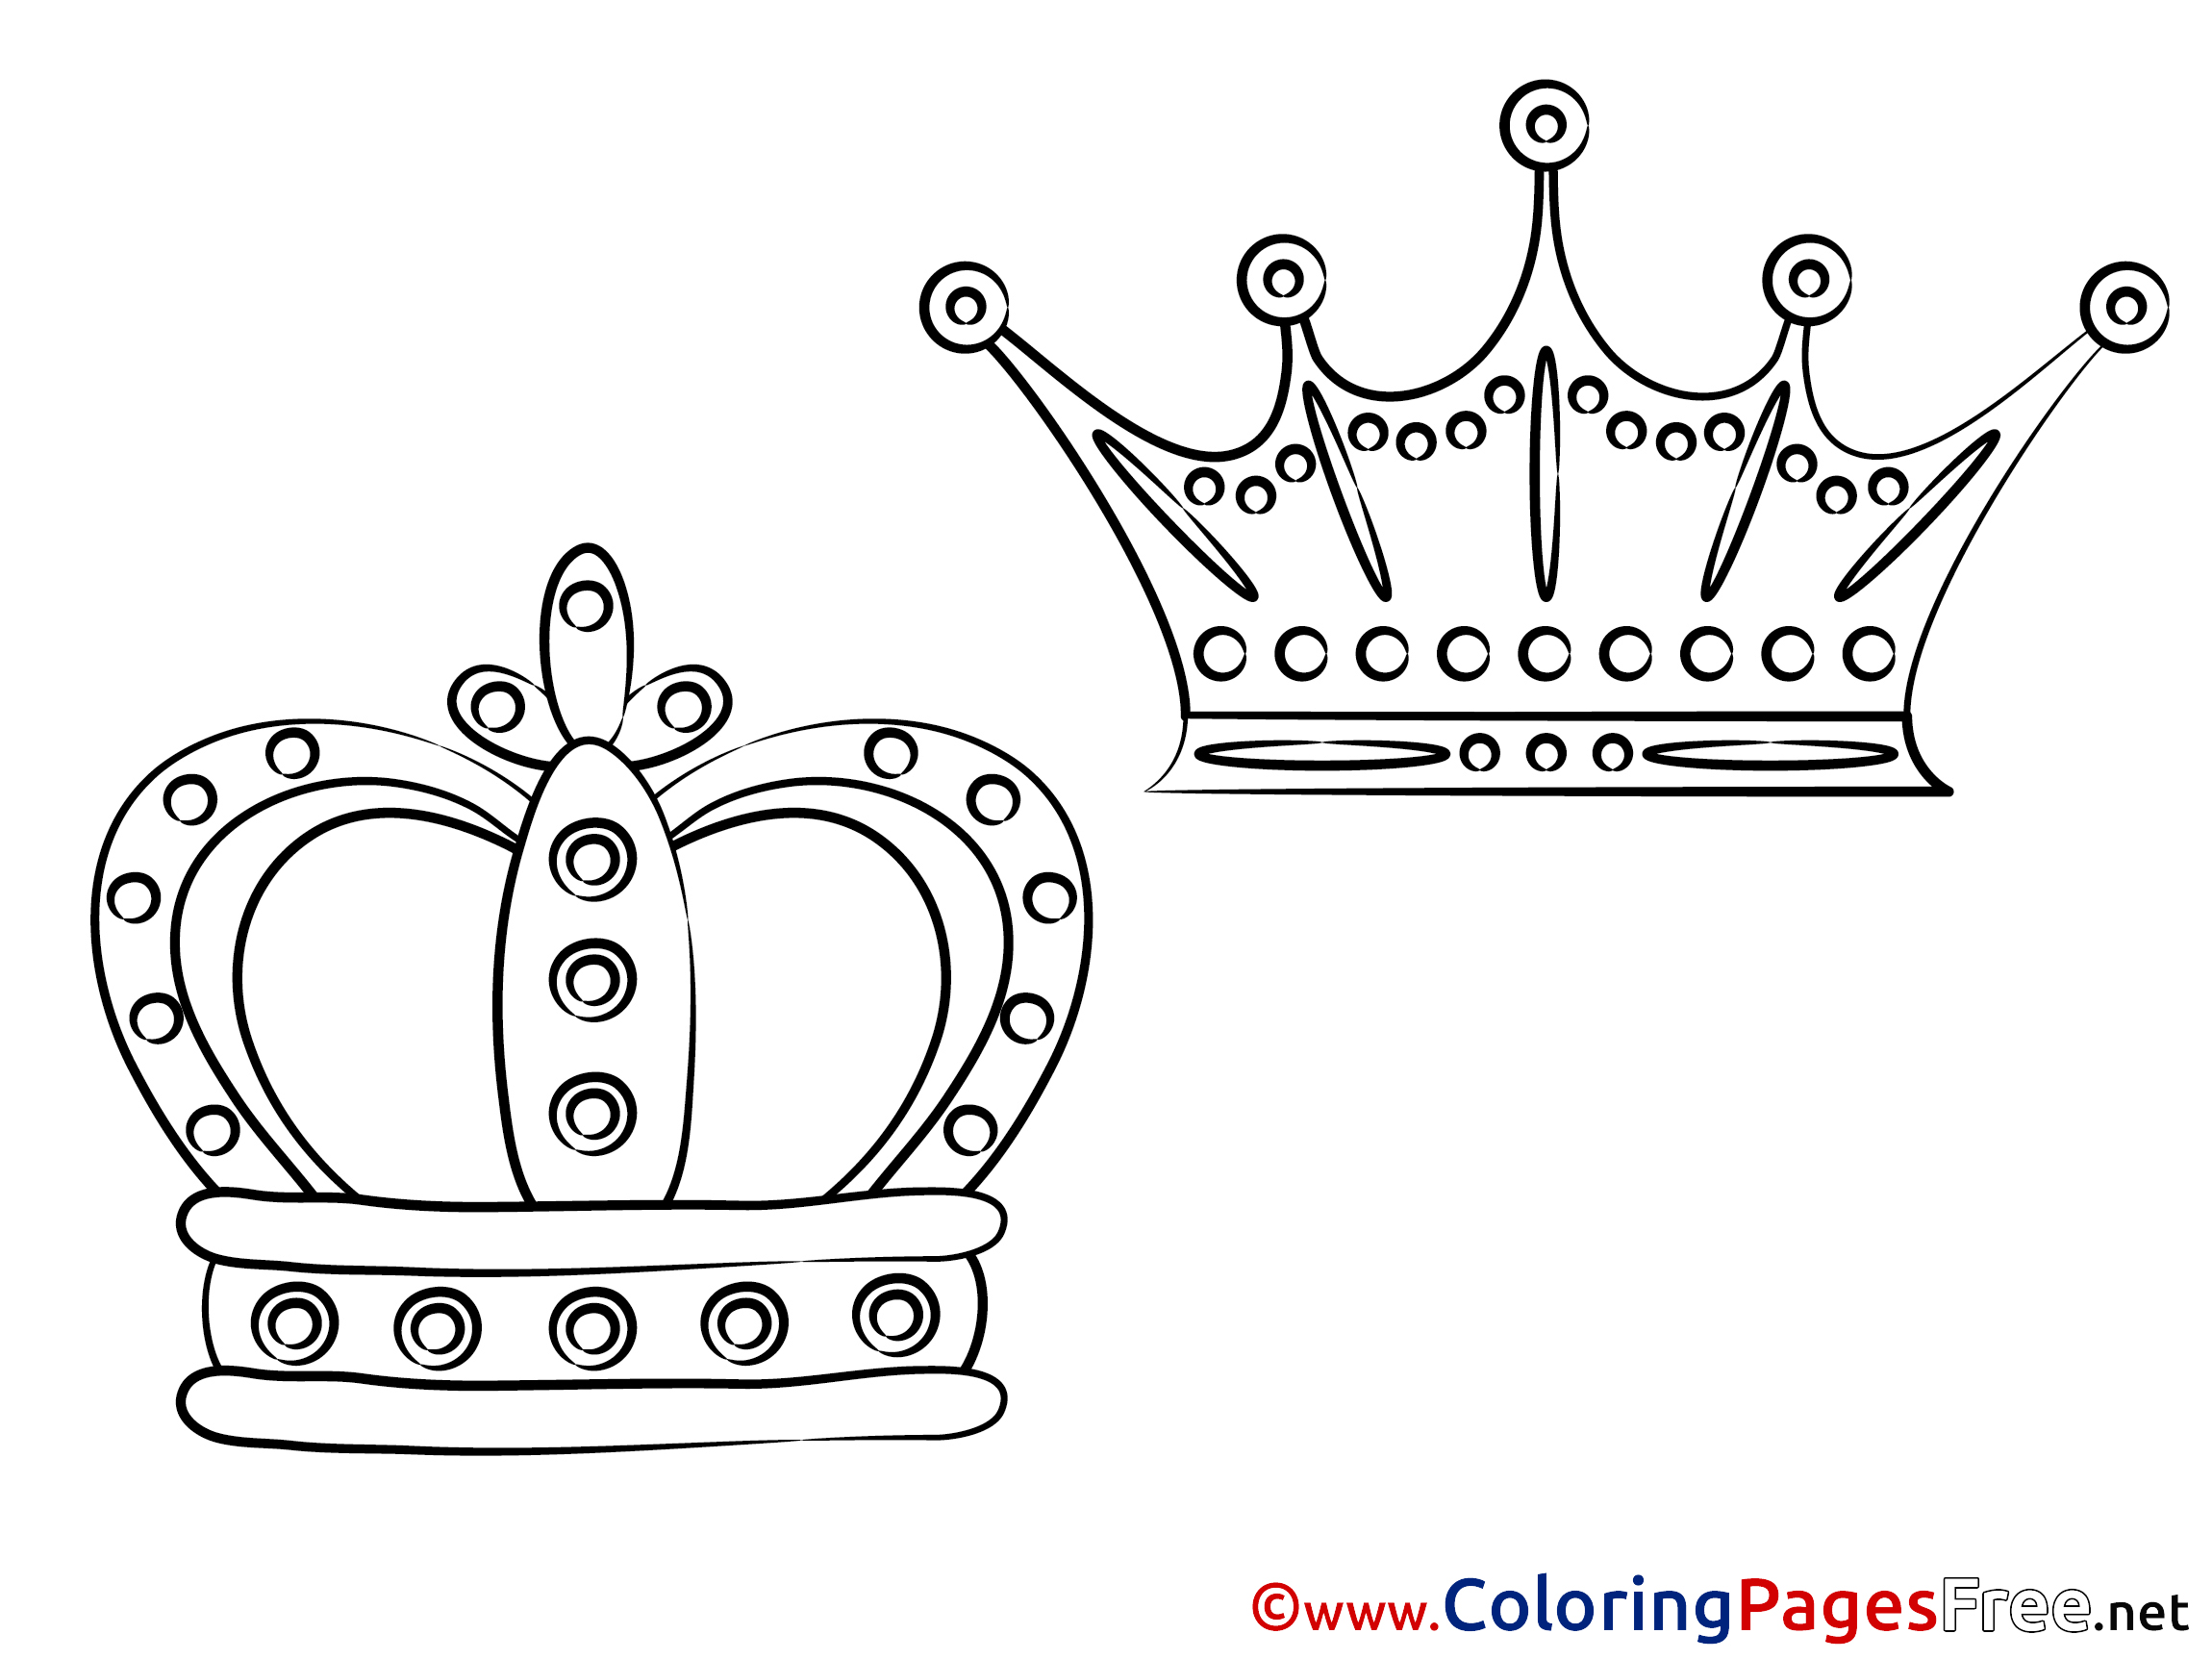 colouring-sheet-crowns-download-free